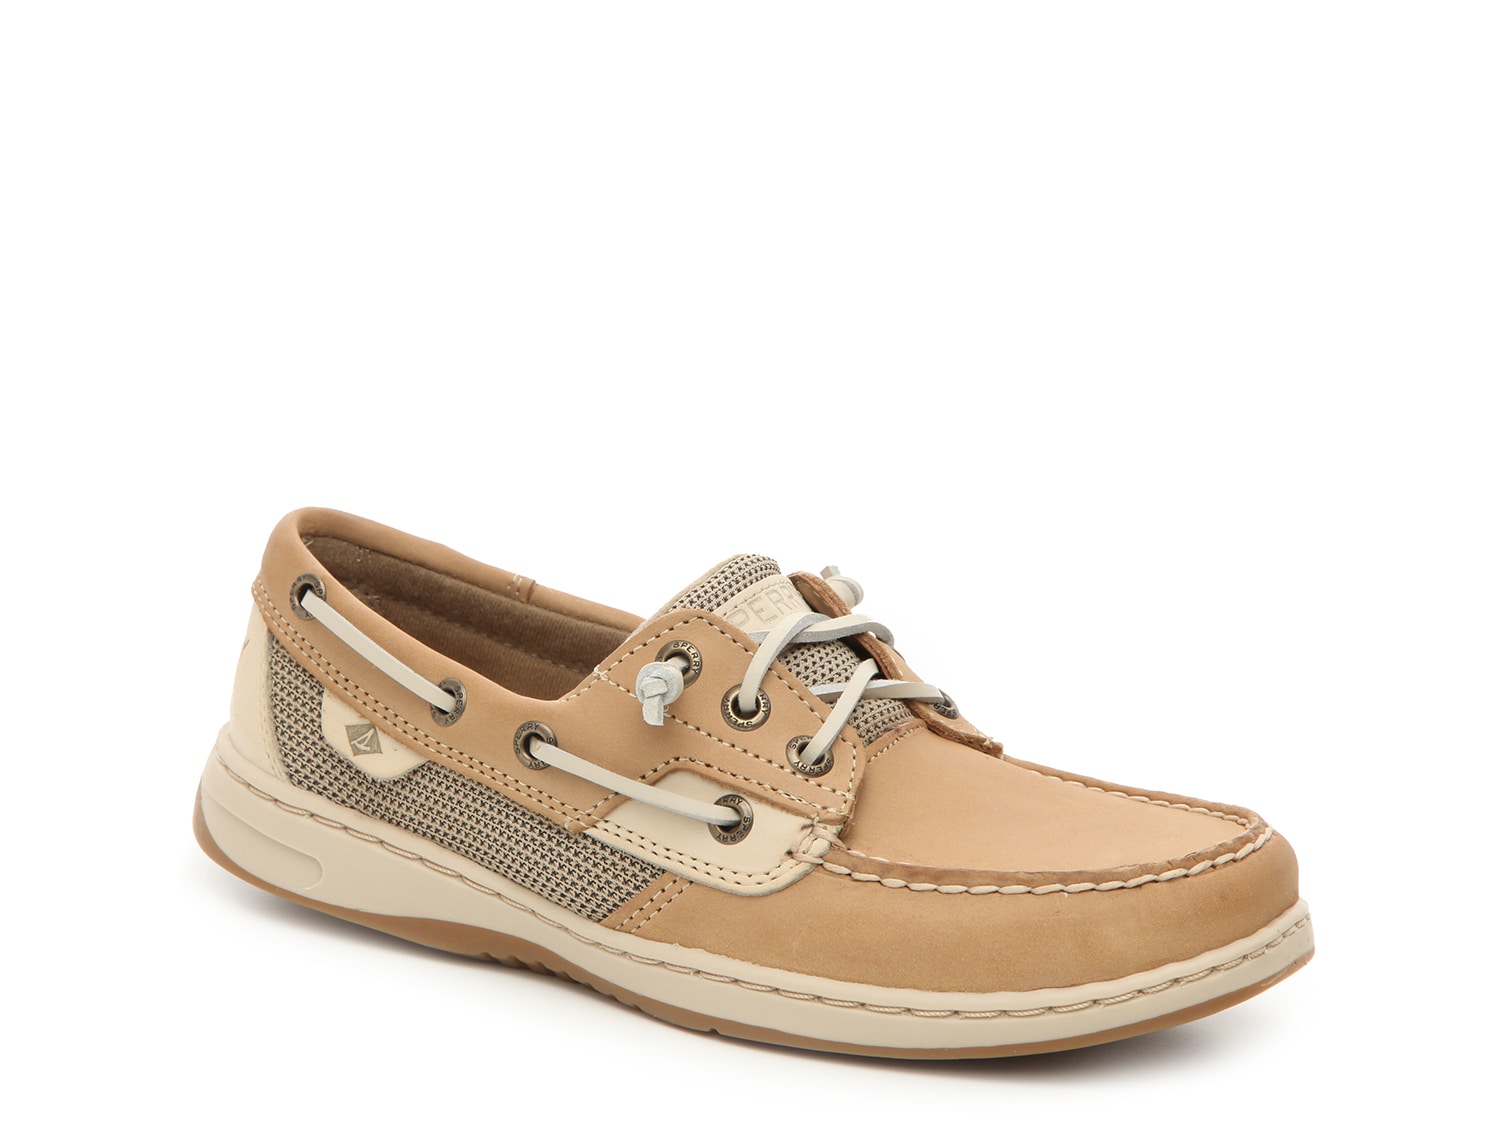 sperry safety shoes